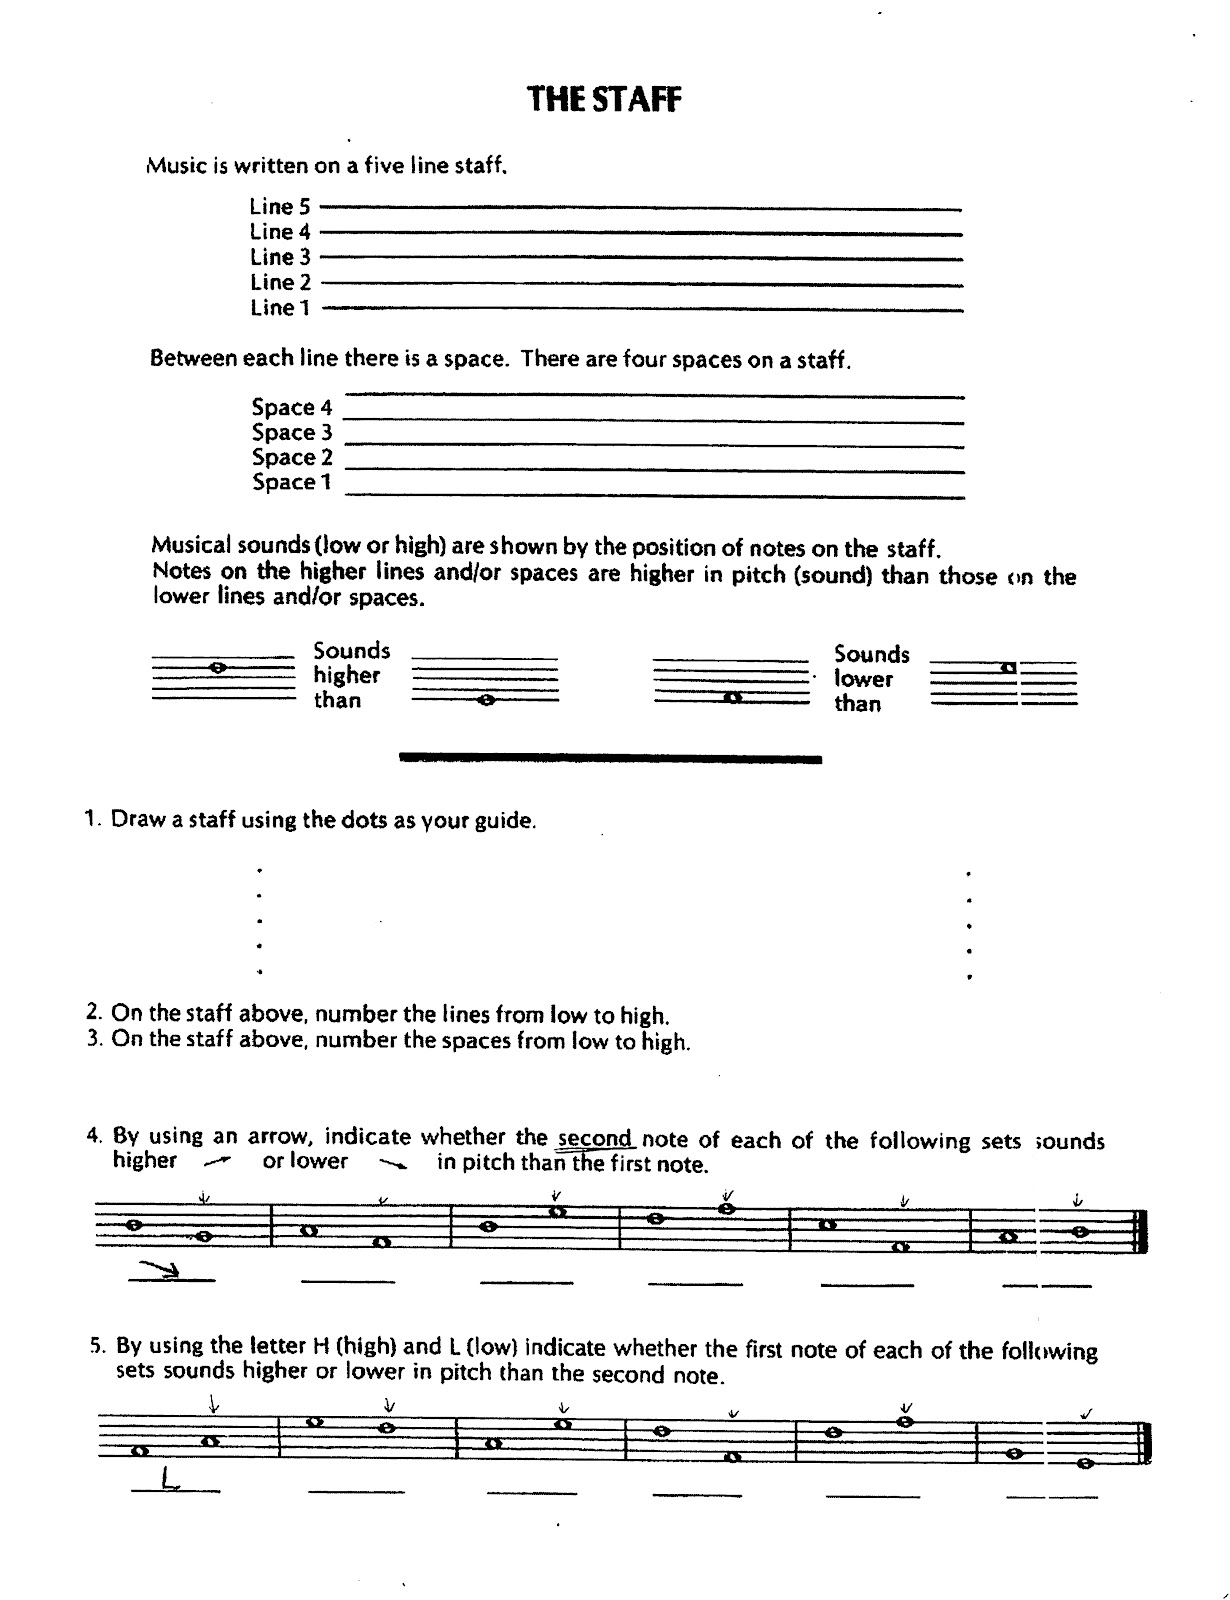 Music Staff Lines and Spaces Worksheet Image